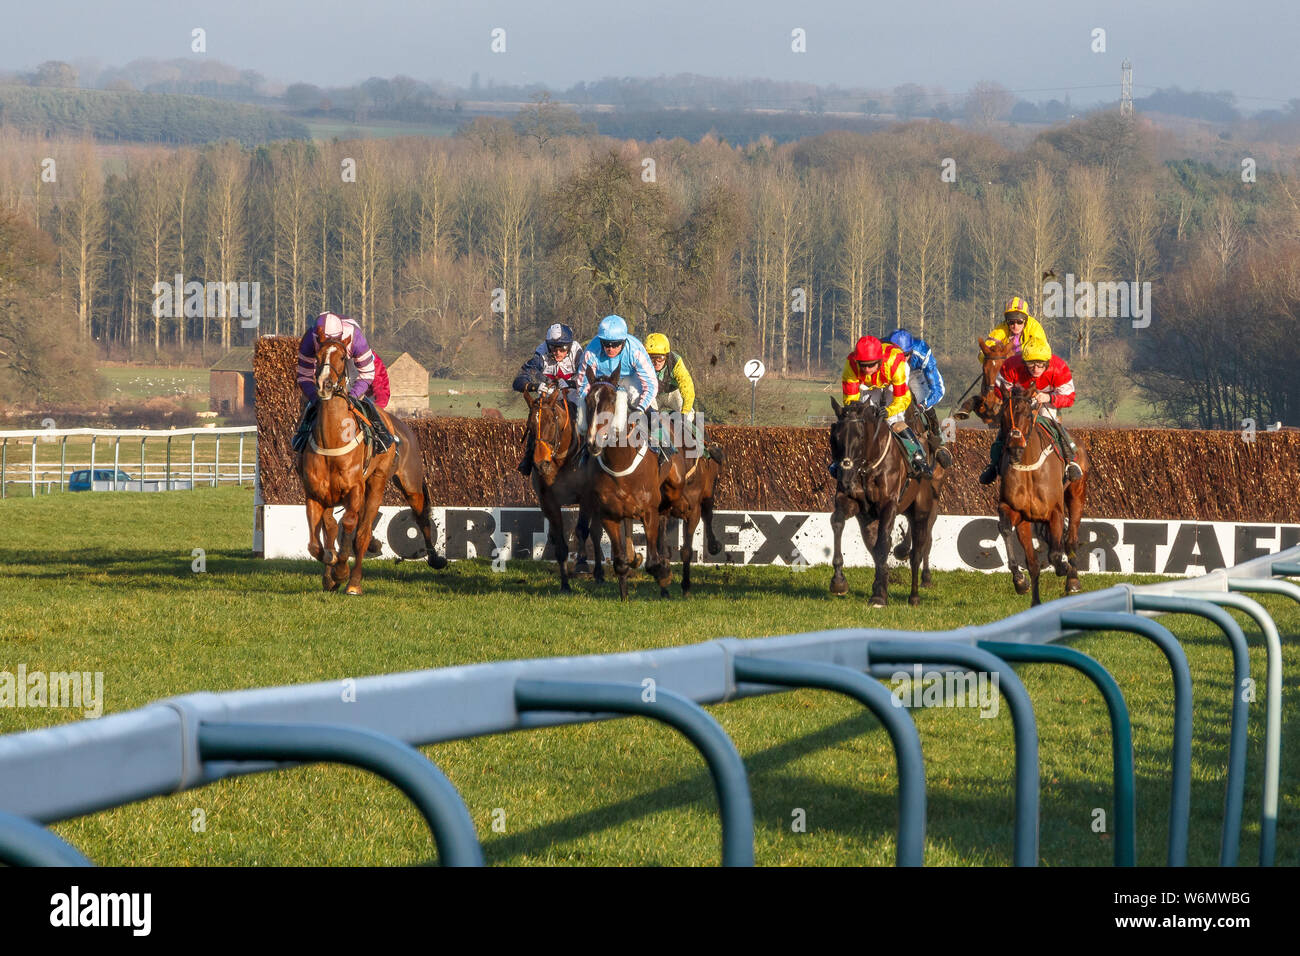 Horse racing over hurdles at Towcester Races, Northamptonshire England Stock Photo